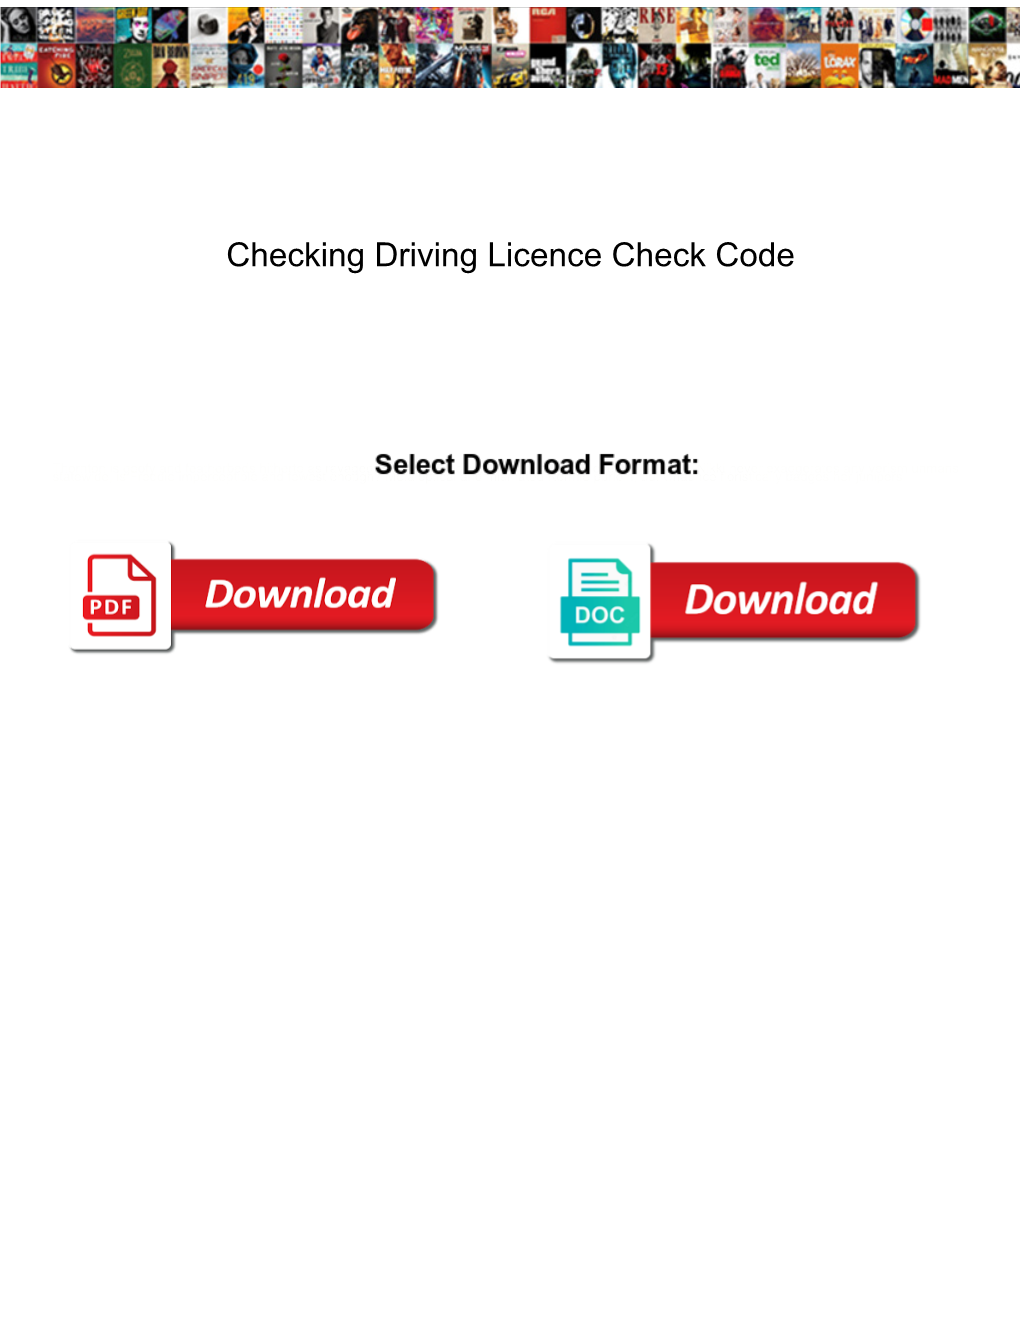 Checking Driving Licence Check Code